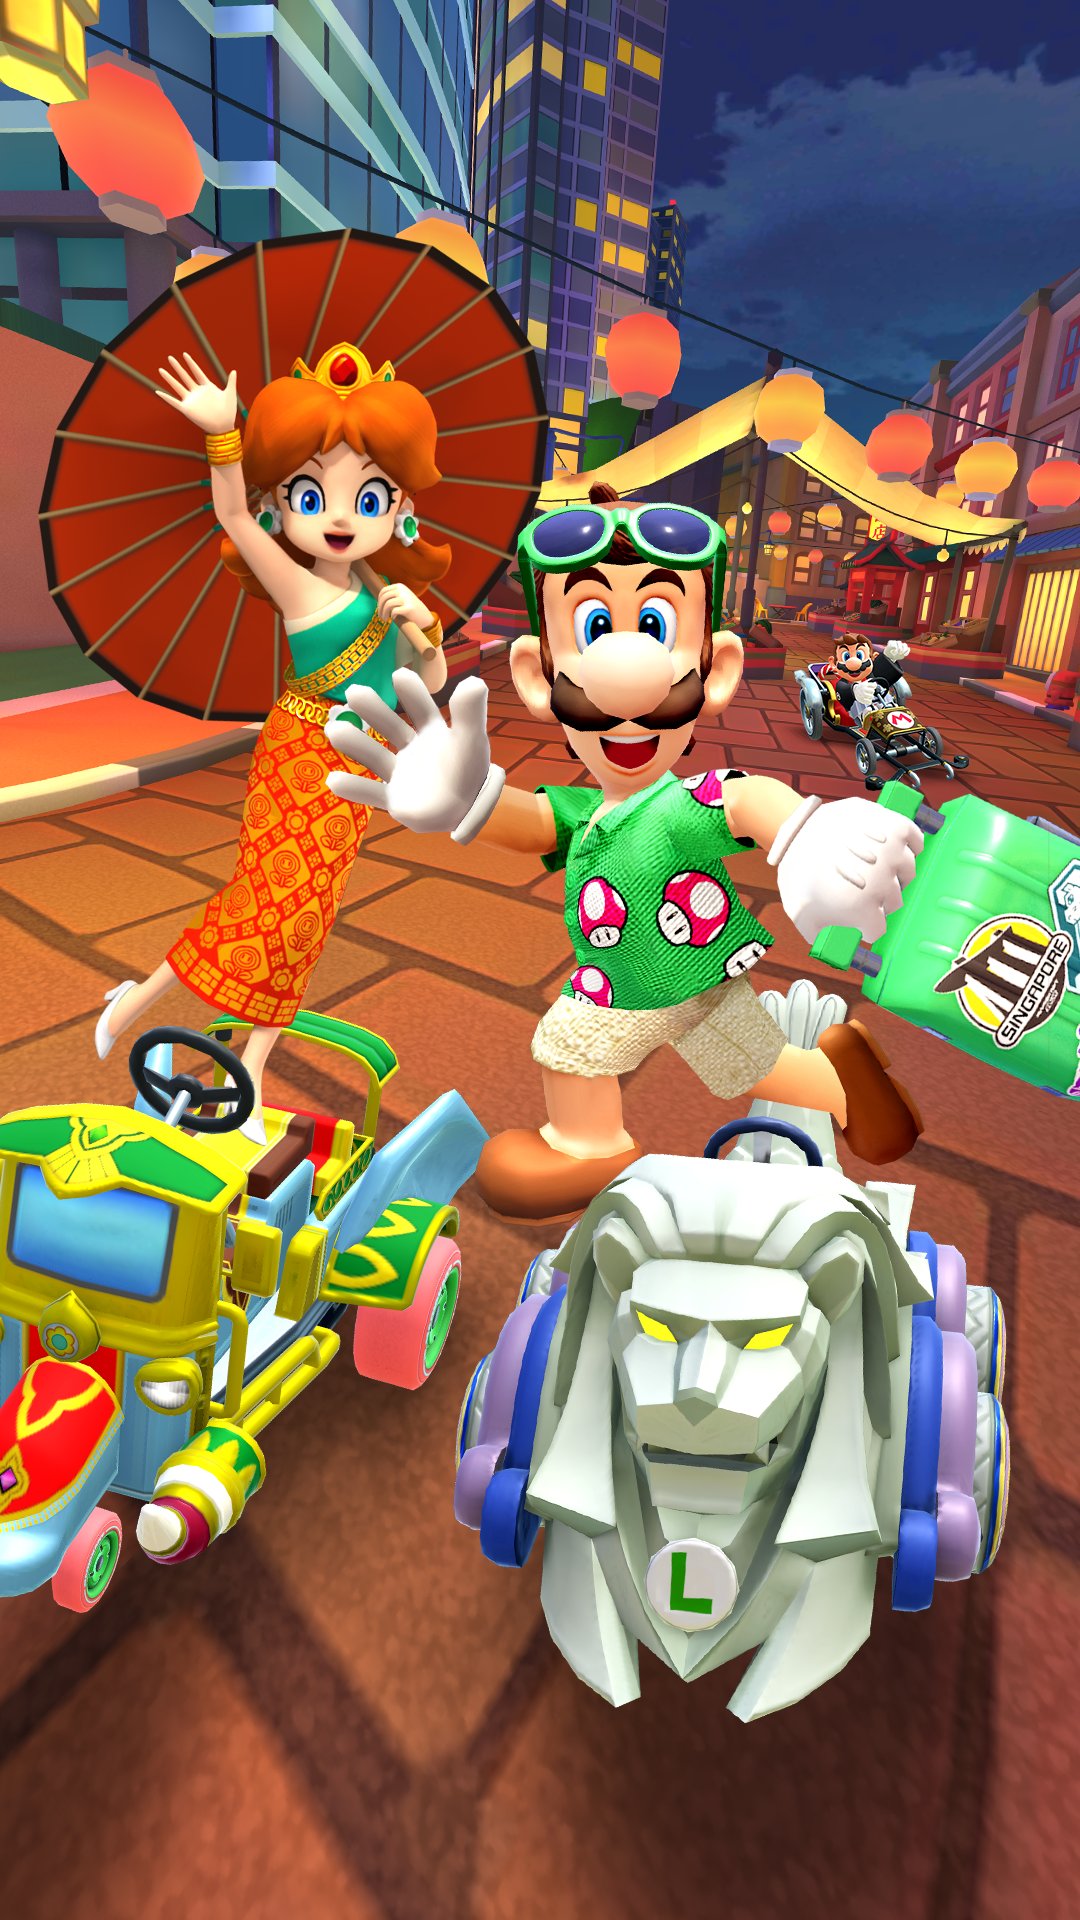 Mario Kart Tour on X: It's time for the Winter Tour in #MarioKartTour!  Matches will take place on 3 city courses, including the Singapore Speedway  3 course. The Winterfest, which will take